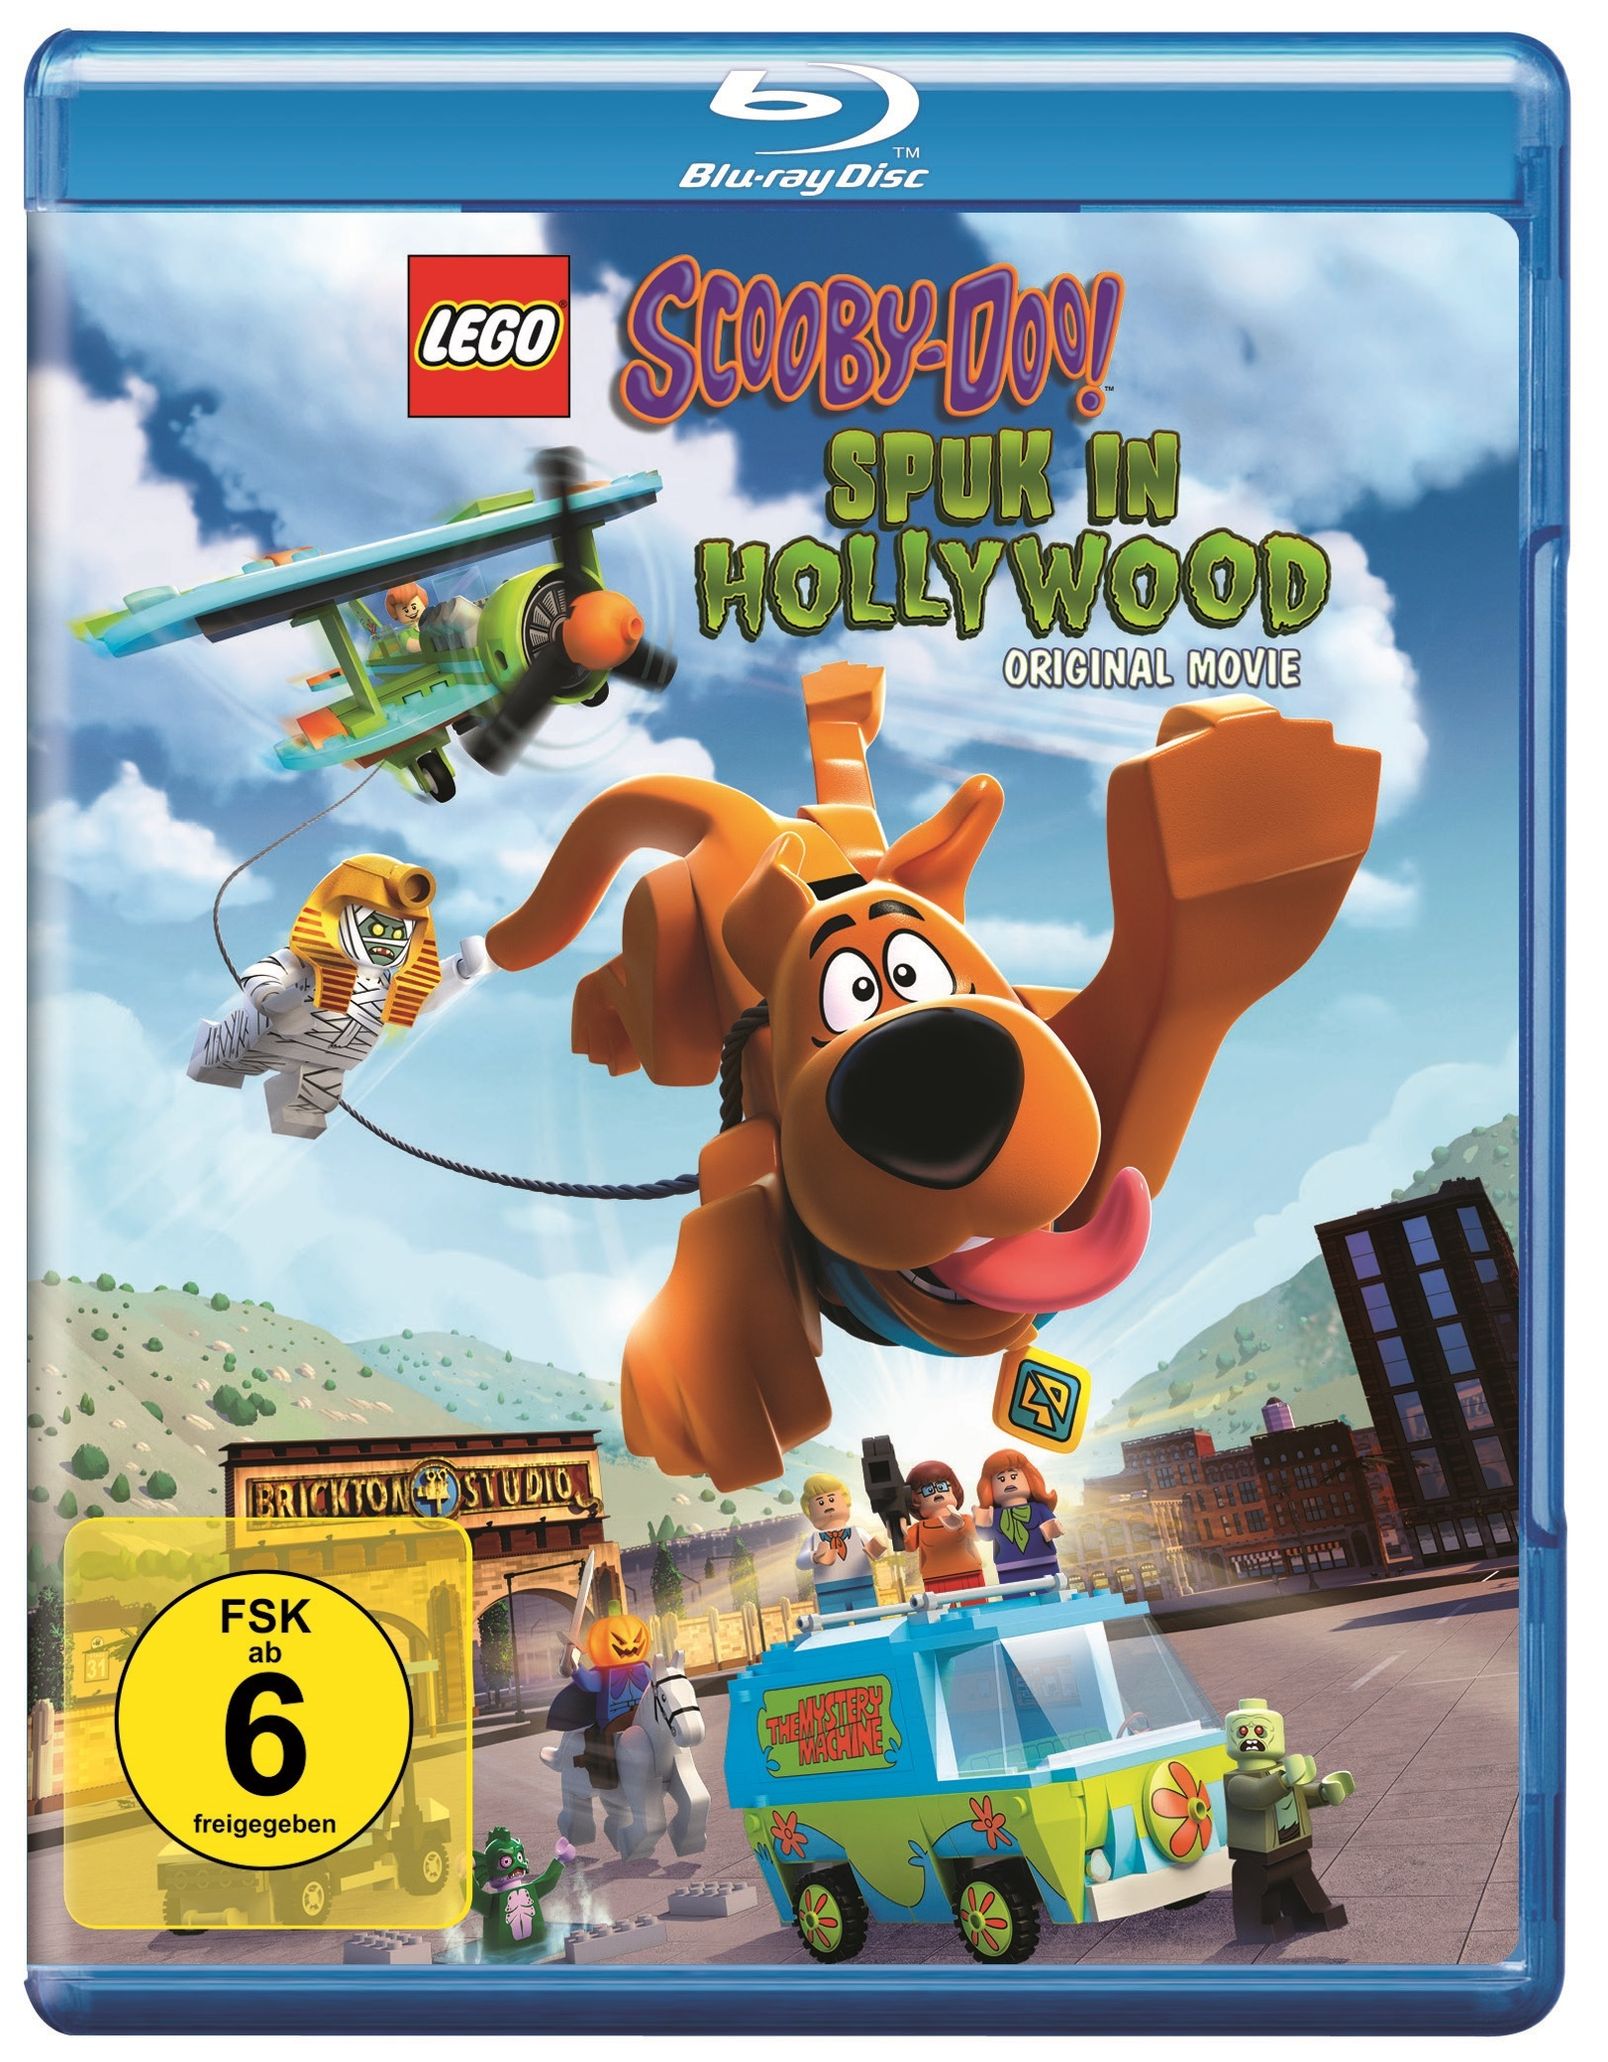 LEGO Scooby-Doo! Spuk in Hollywood kaufen | tausendkind.ch